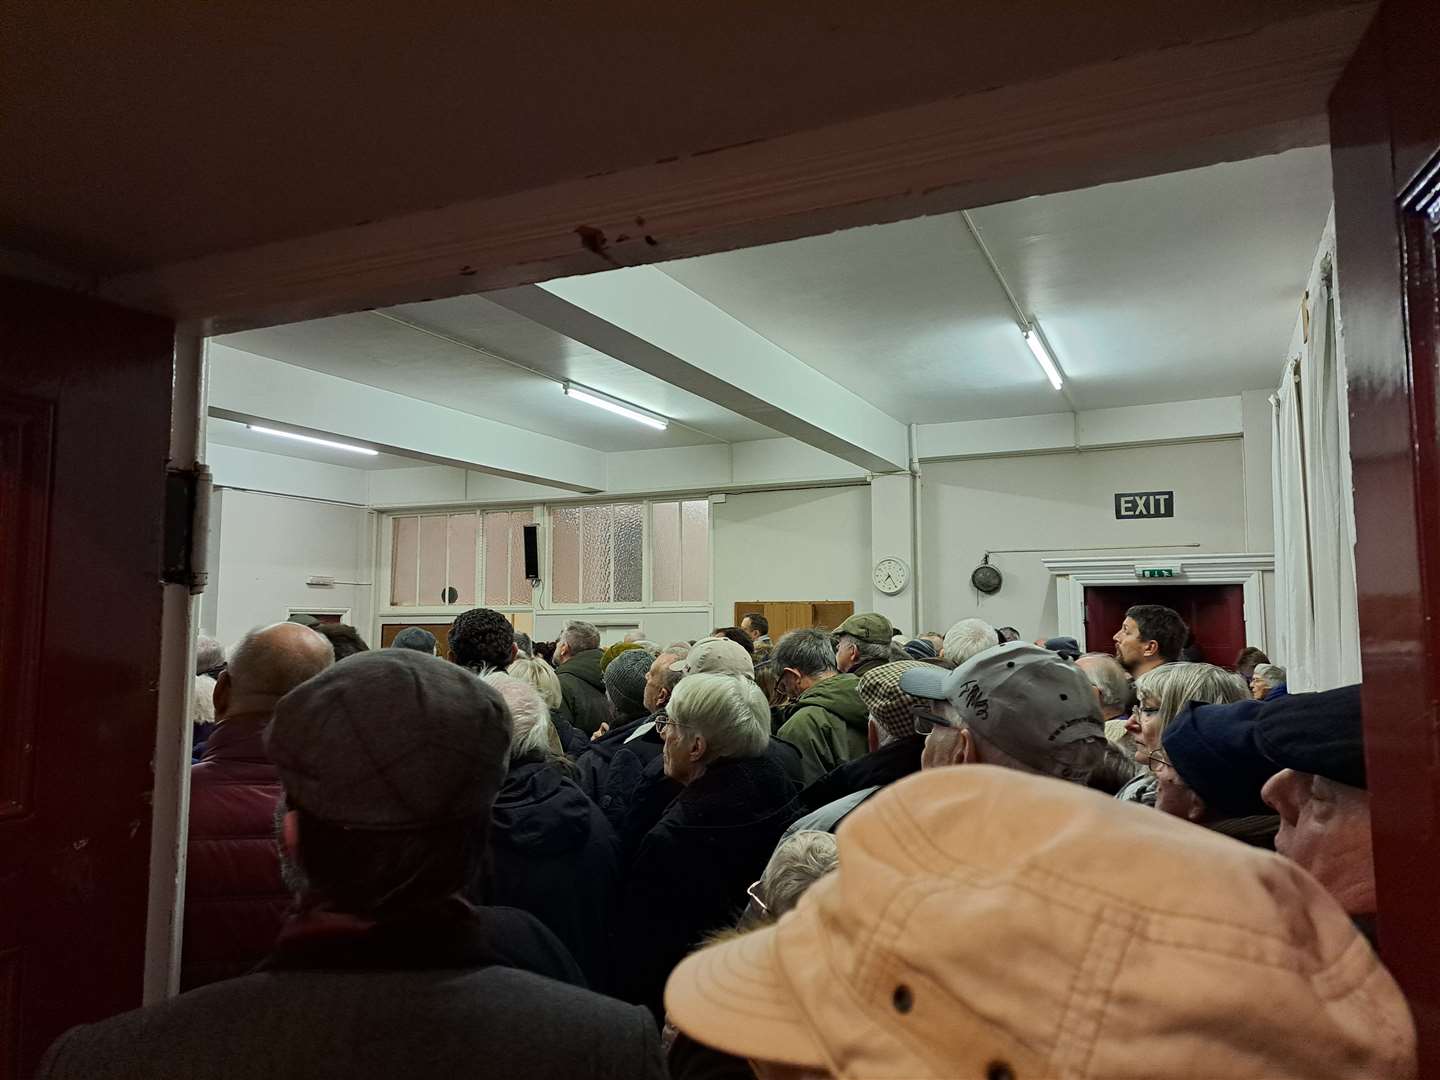 People crowded into the entryway of the United Reform Church hall in Herne Bay in an attempt to hear those speaking at the meeting